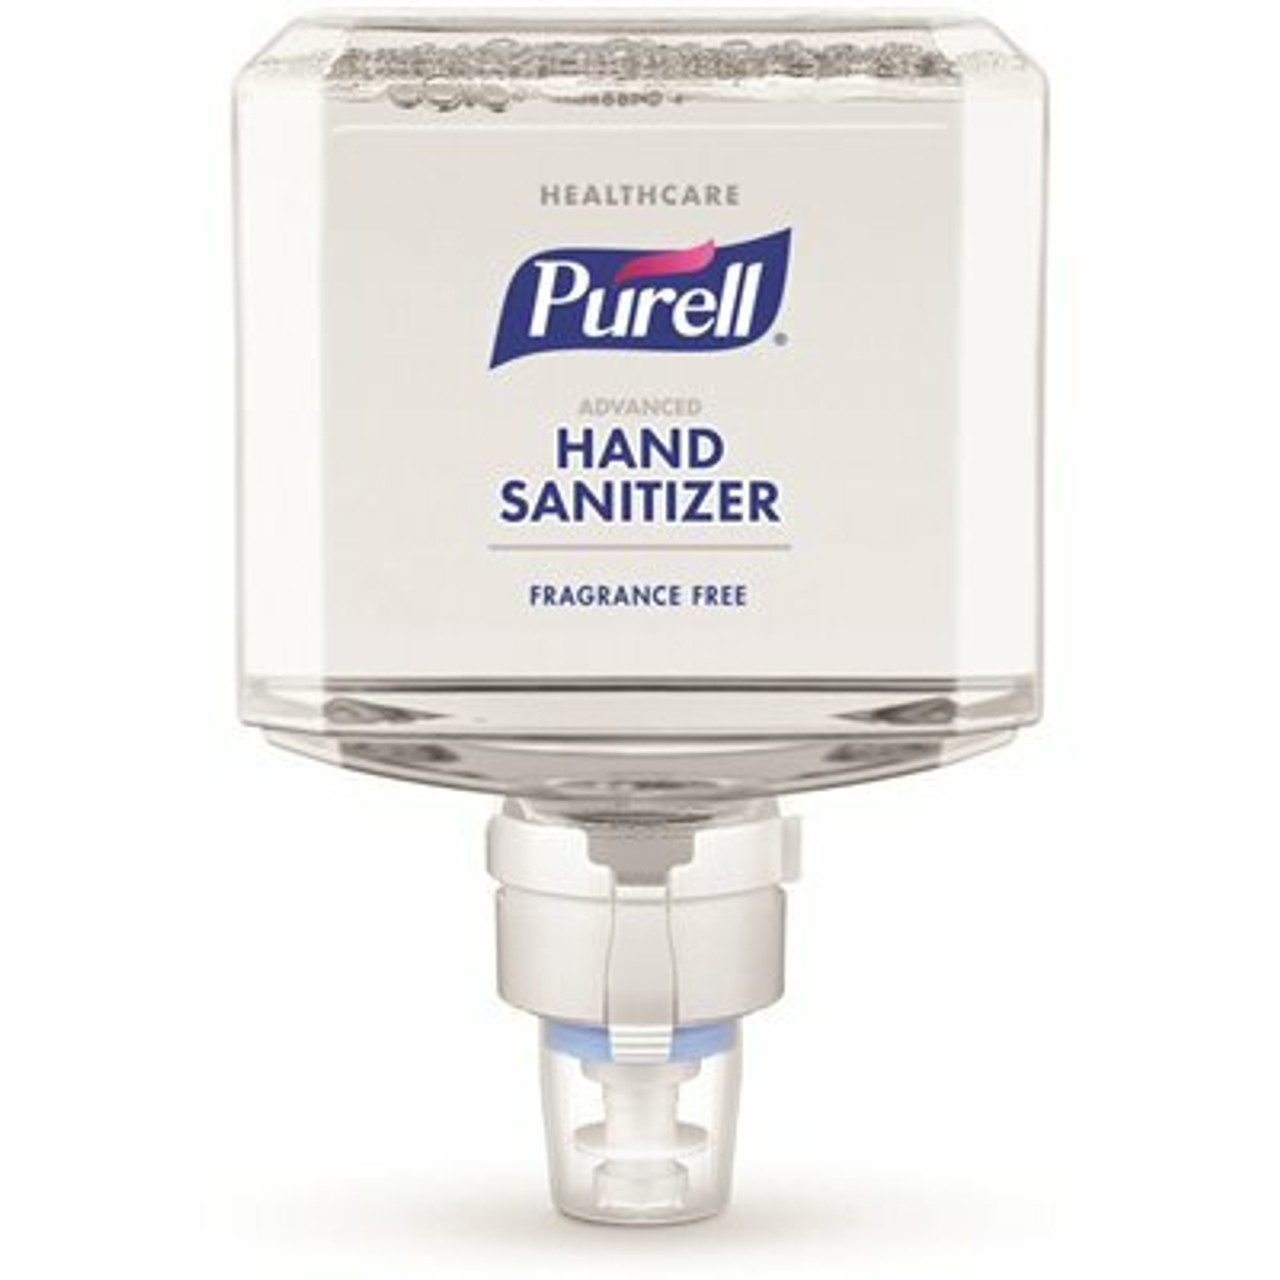 Purell Healthcare Advanced Hand Sanitizer, 1200 Ml Refill For Es8 Touch-Free Dispenser, Fragrance Free (2-Pack Per Case)